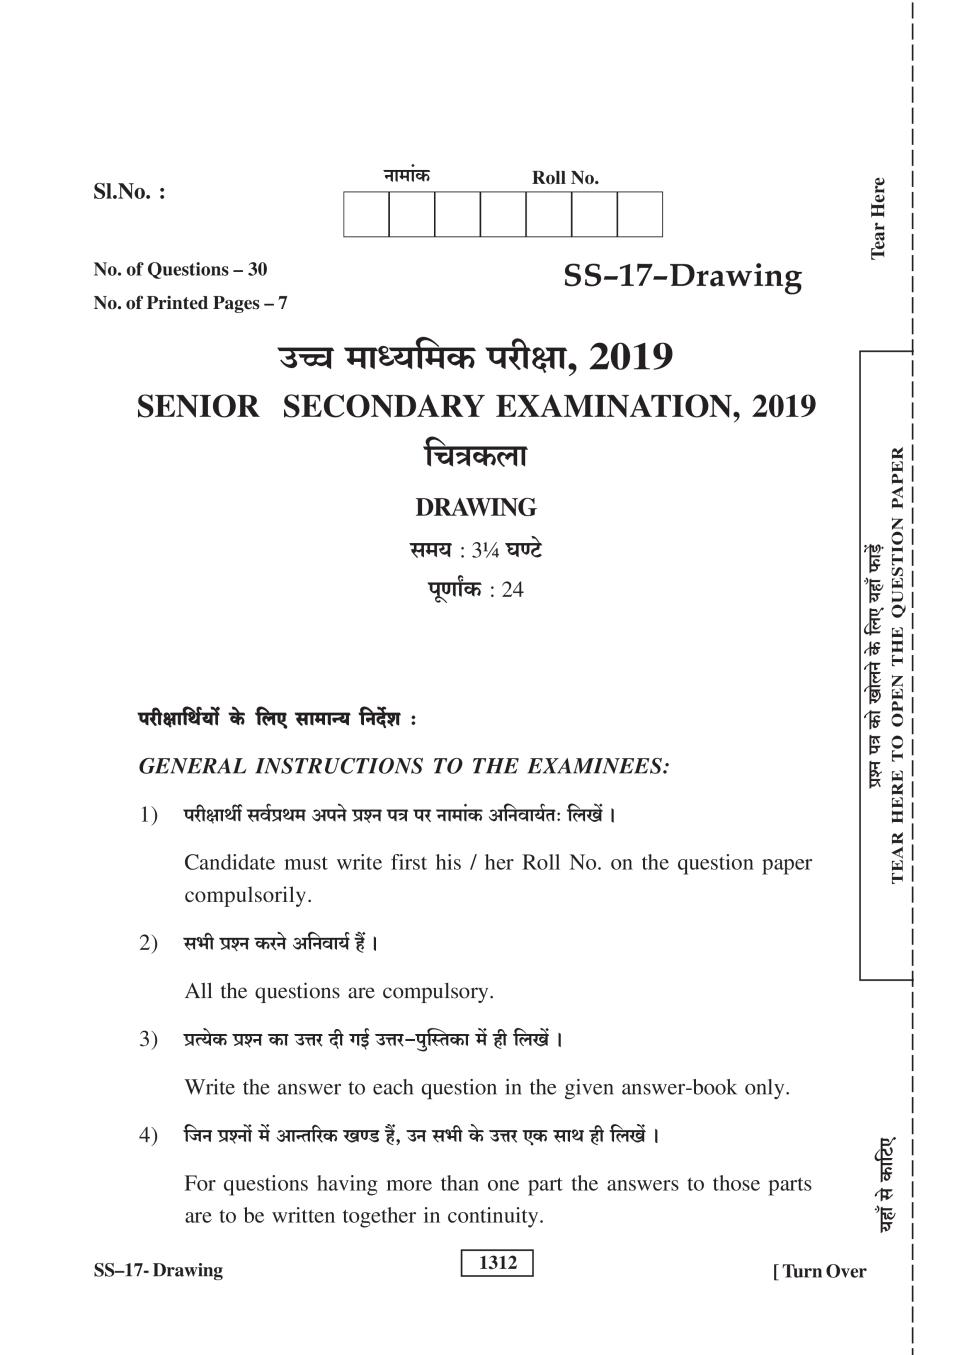 Rajasthan Board 12th Class Drawing Question Paper 2019 - Page 1